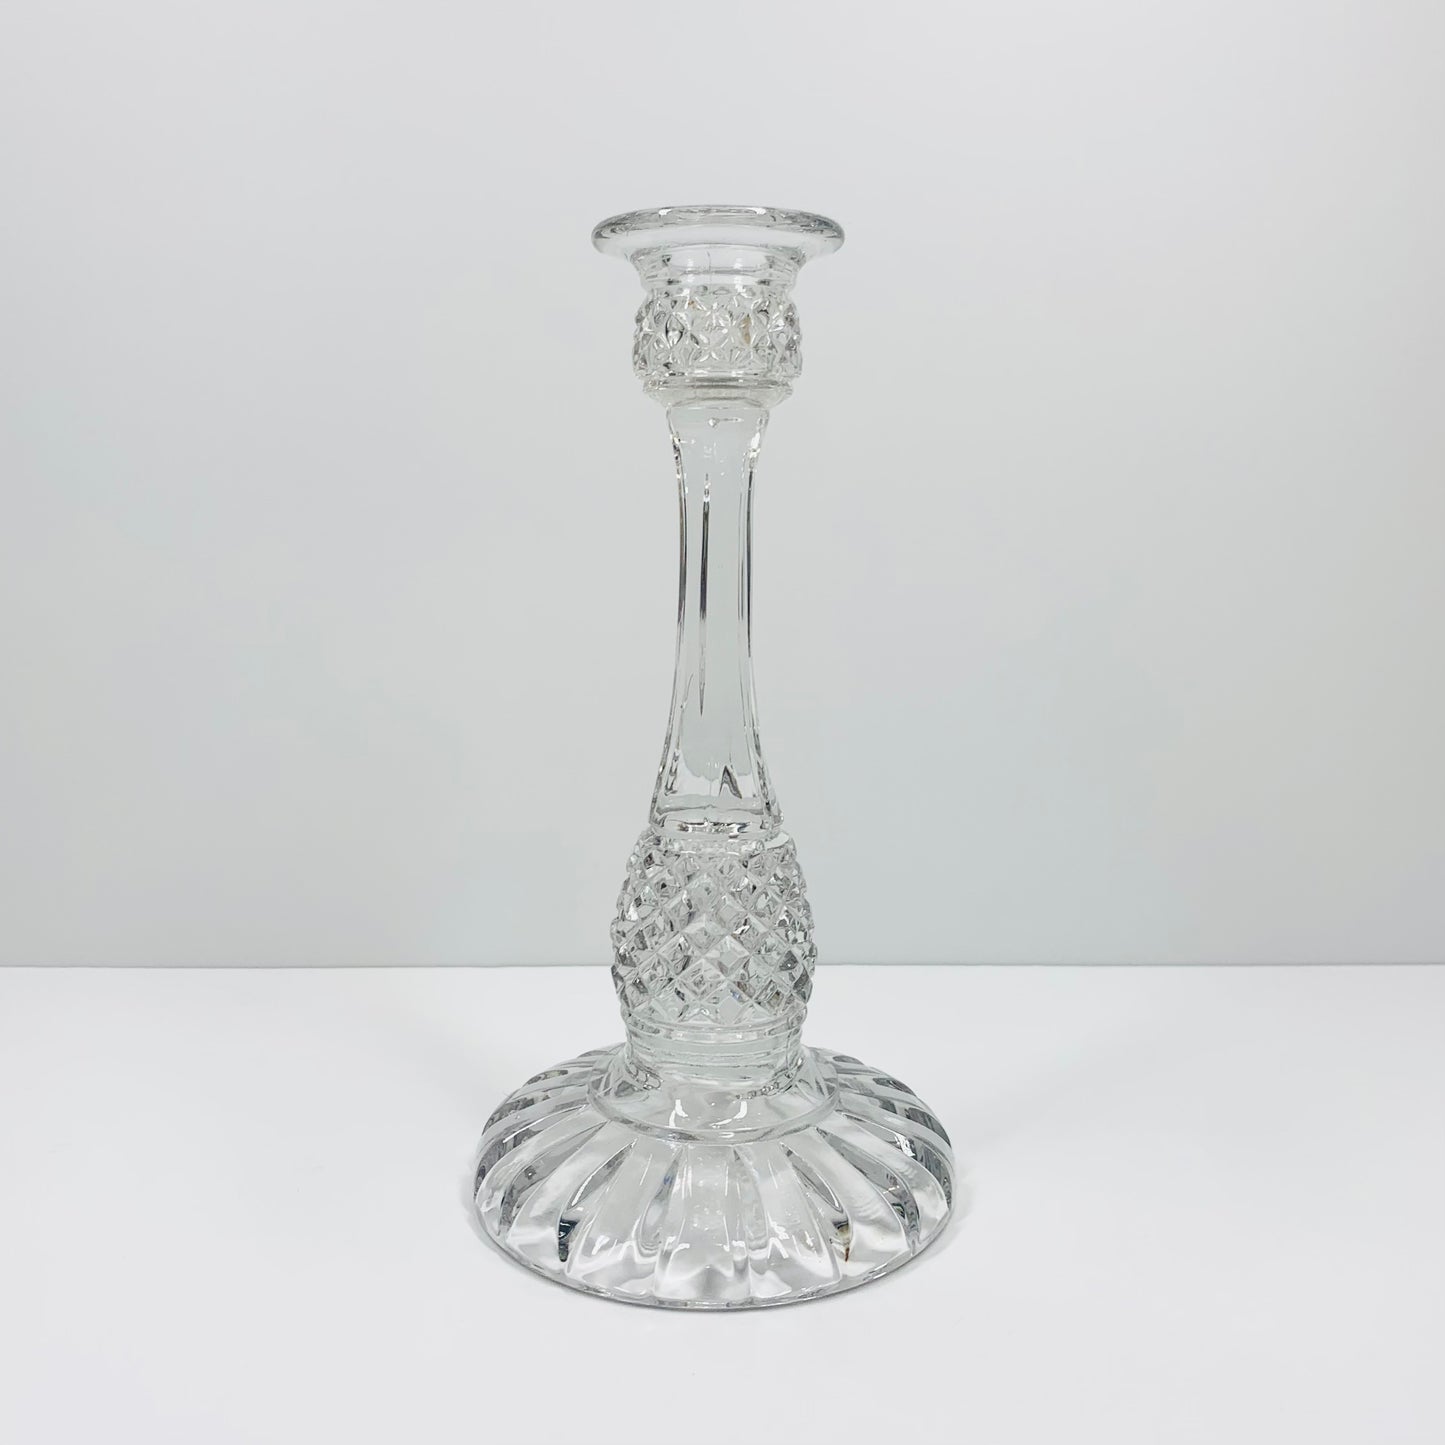 Antique tall cut crystal candle holder